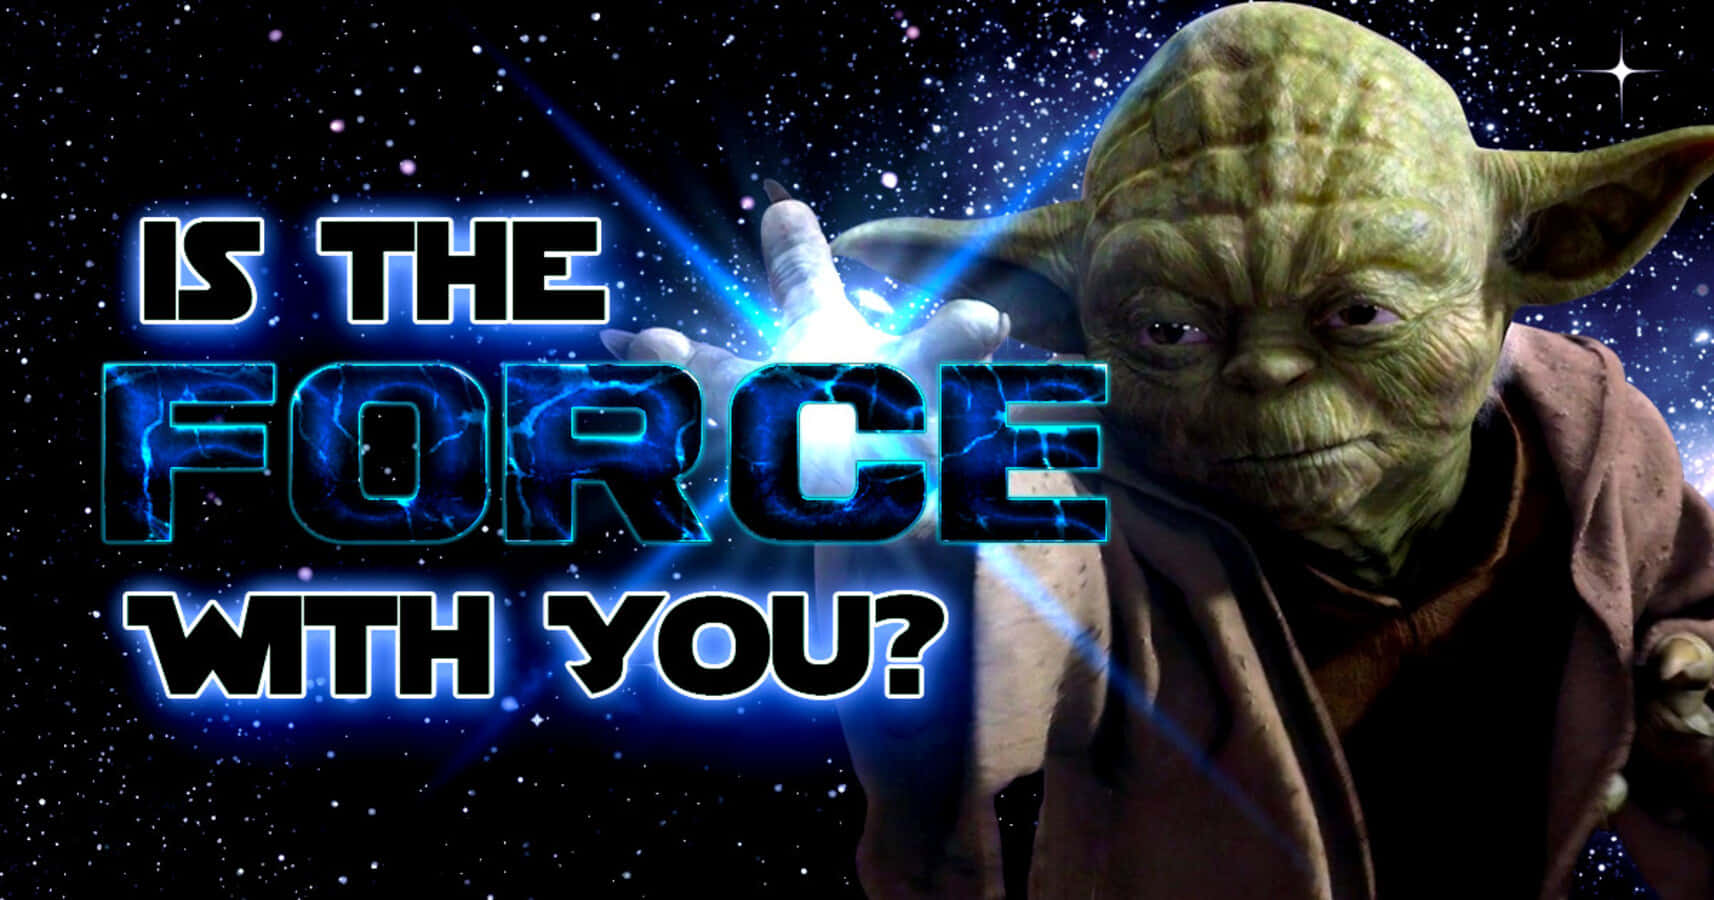 May The Force Be With You - Galactic Inspirational Quote Background